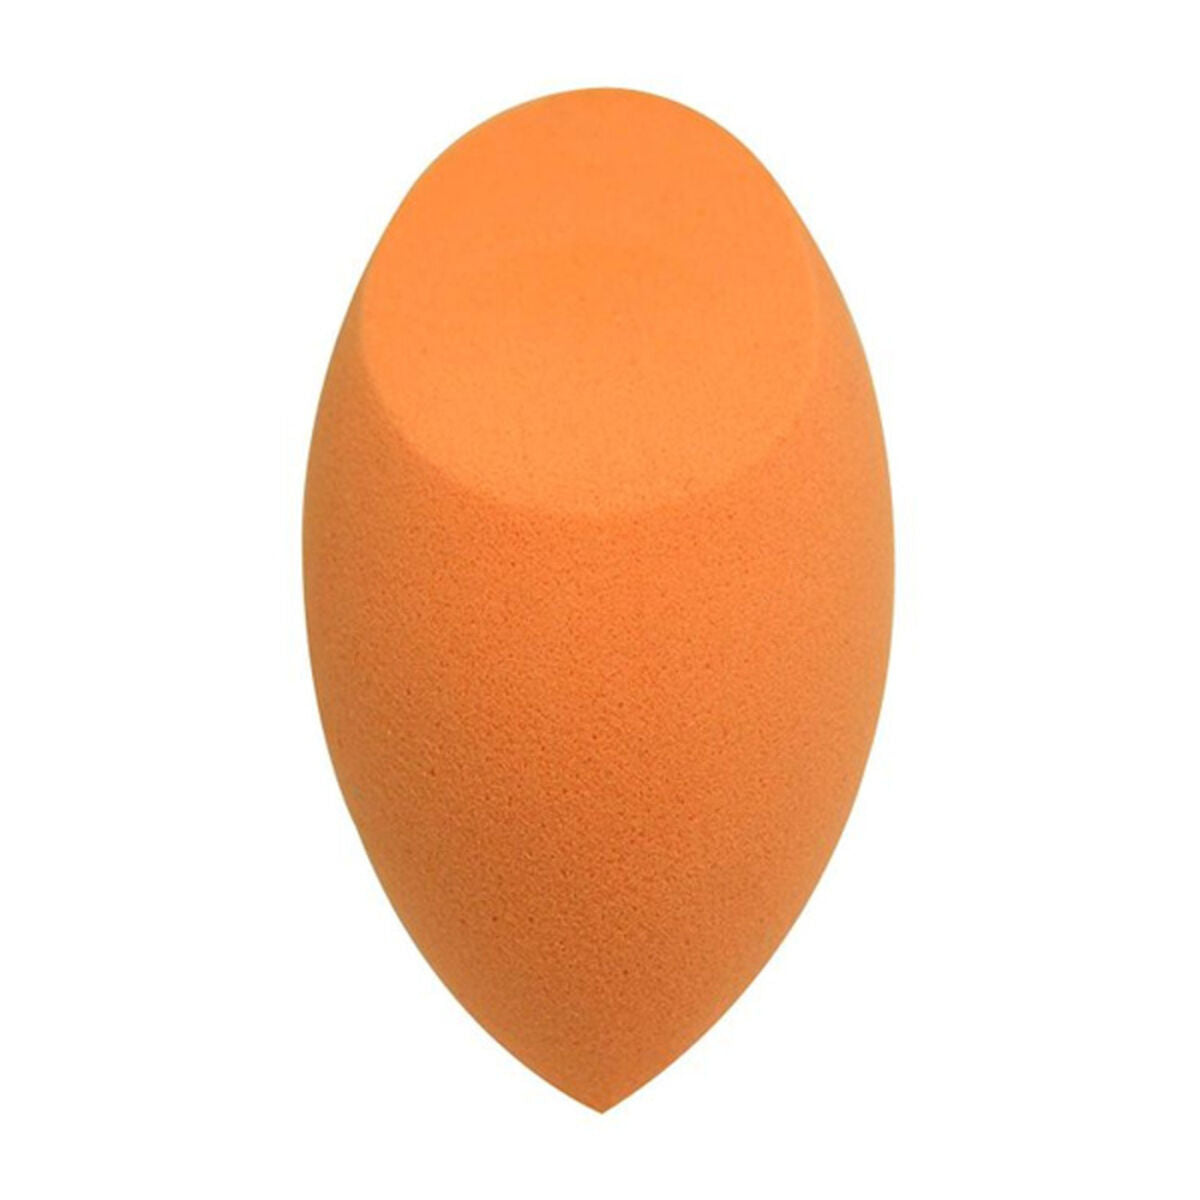 Make-up Sponge Miracle Complexion Real Techniques-0